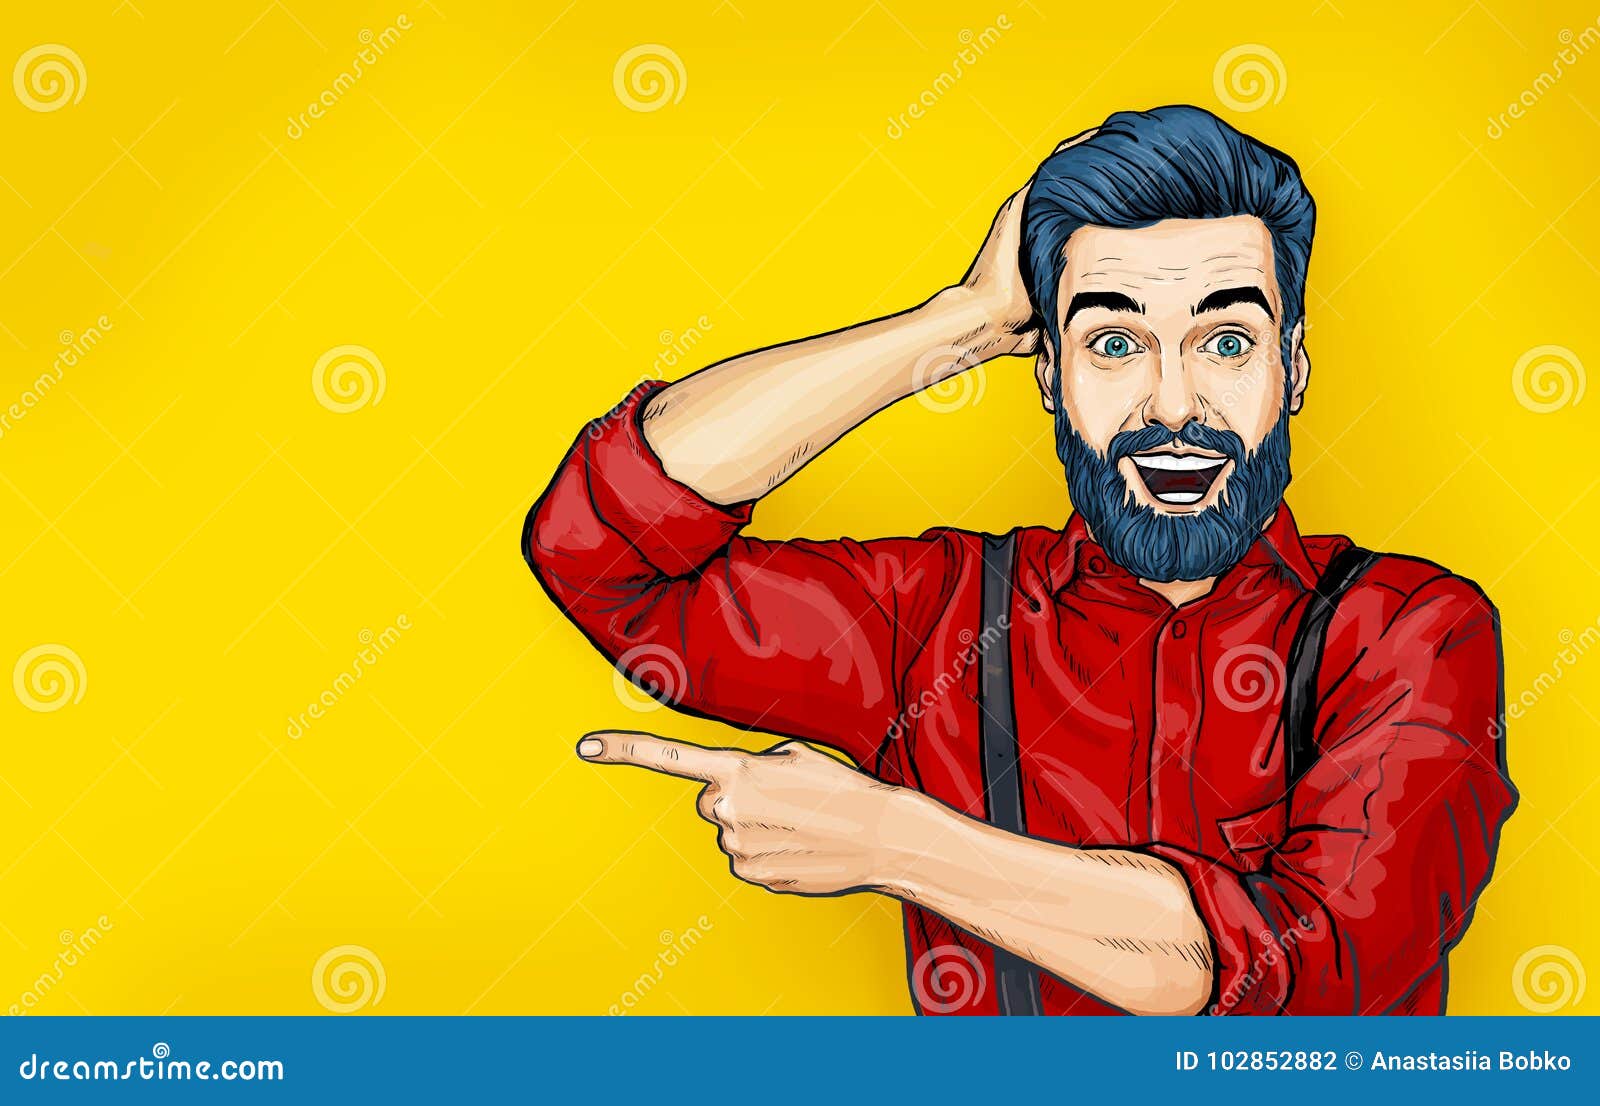 man with shocked facial expression. surprised man in comic style. man showing . advertisement. smiling man. wow.